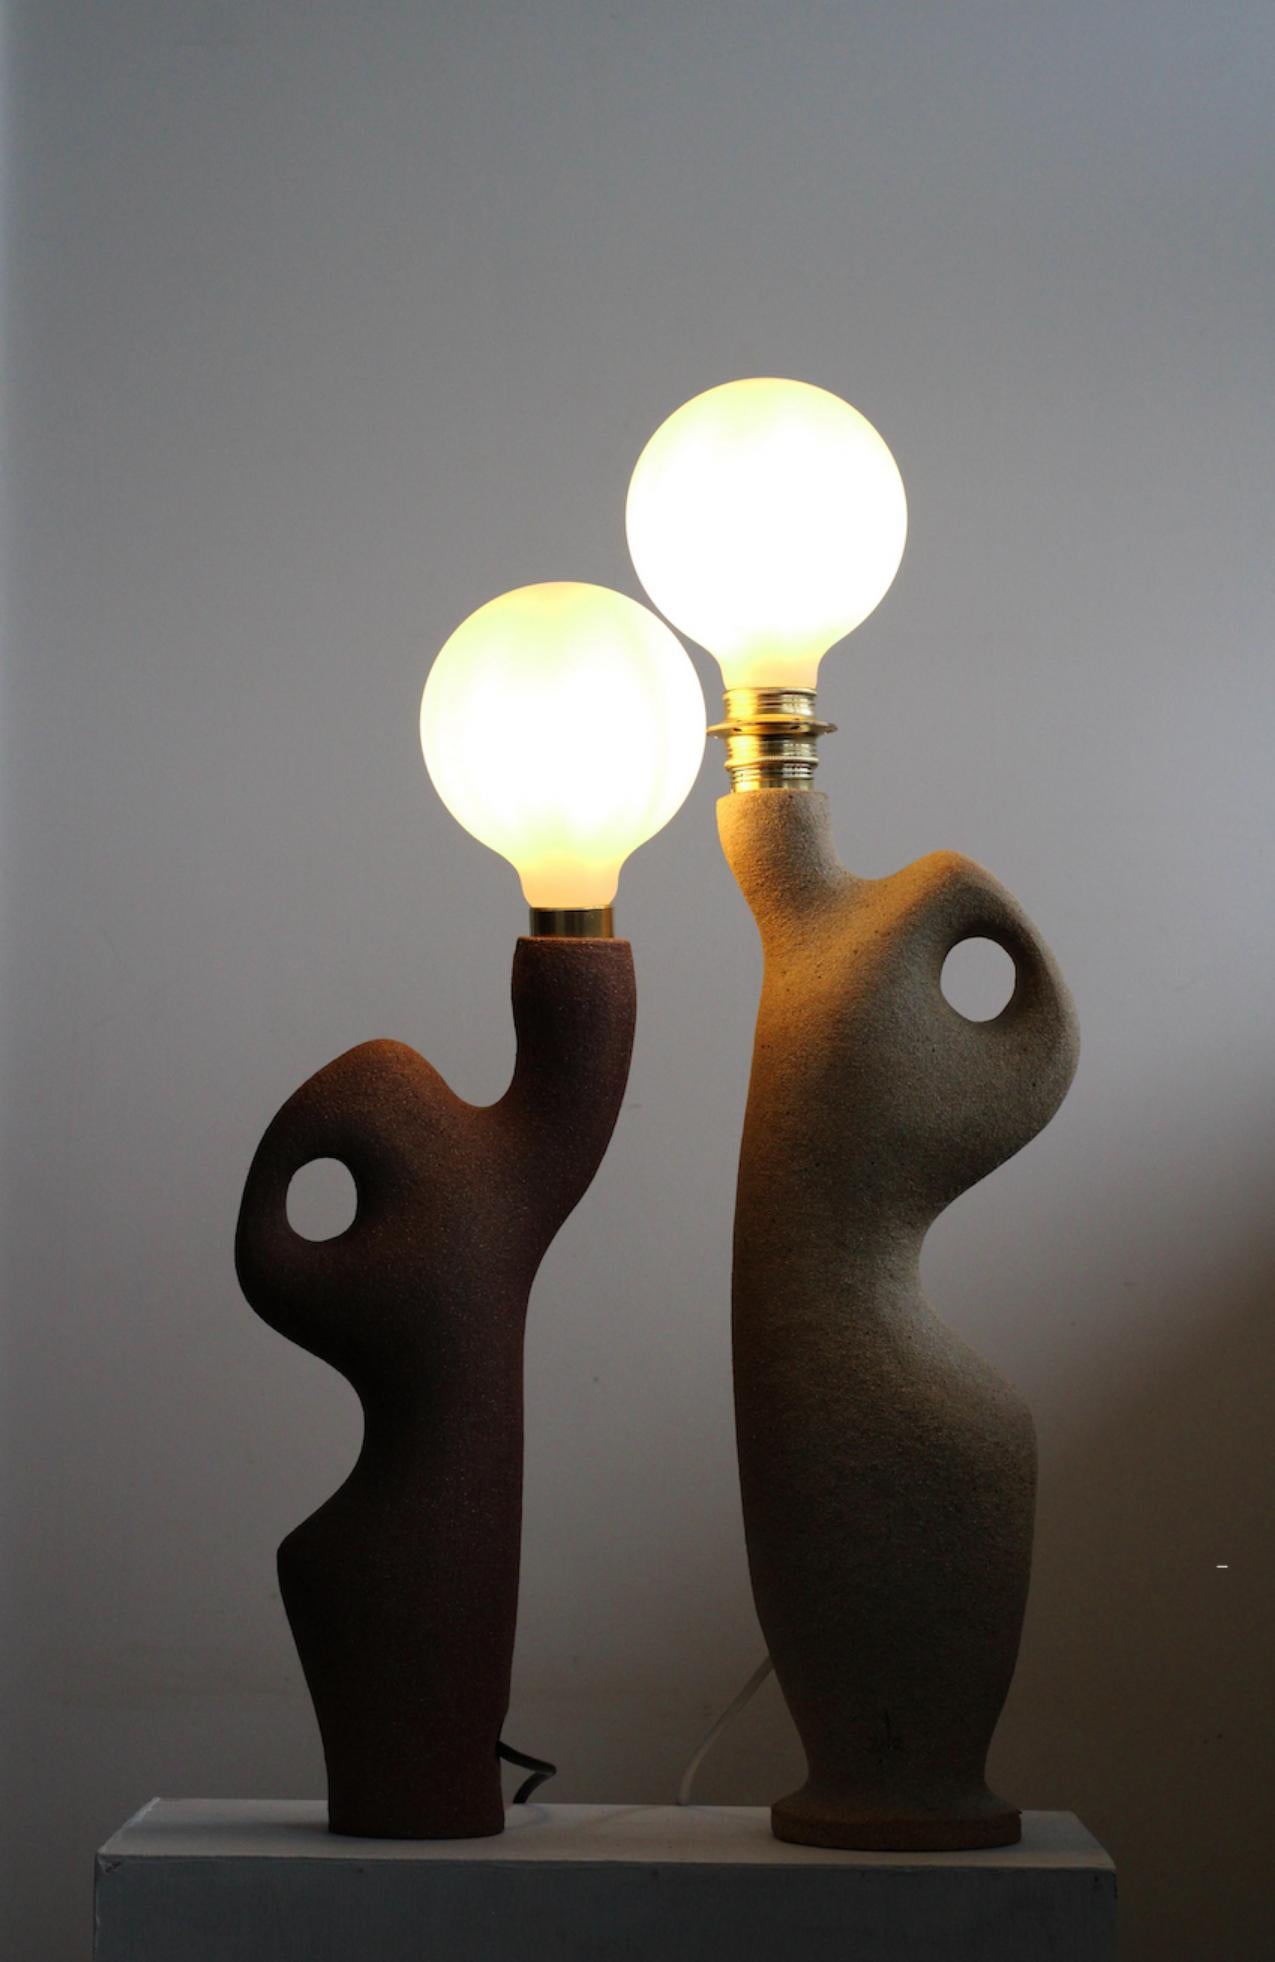 Pleomorph 50A lamp by Abid Javed
Dimensions: D 20 x 50 cm (Dimensions are variable)
Materials: Ceramic 
Multiple clay color and size options.

Coiled hollow form with a non-glazed ceramic surface. Bulb optional.

All our lamps can be wired